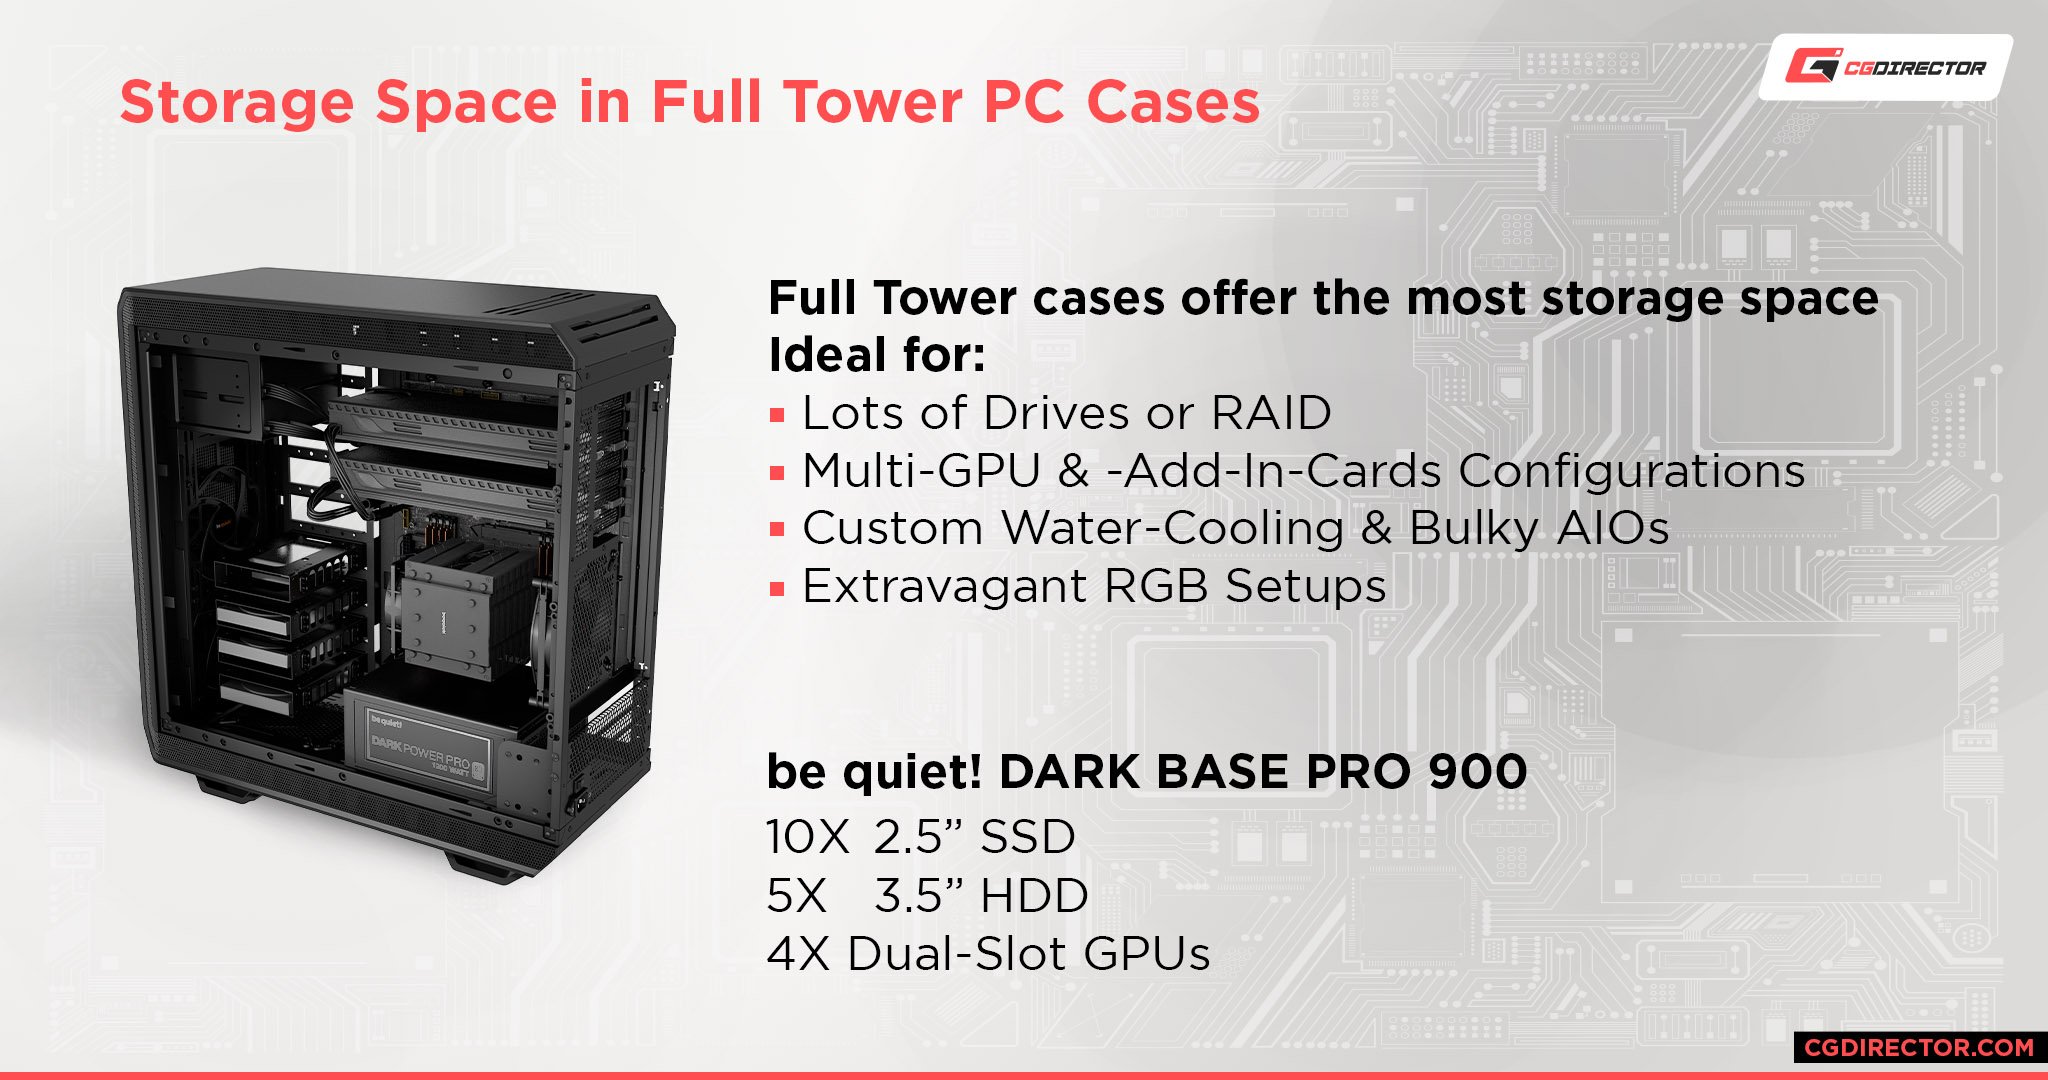 Benefits and Storage Space in a Full Tower PC Case